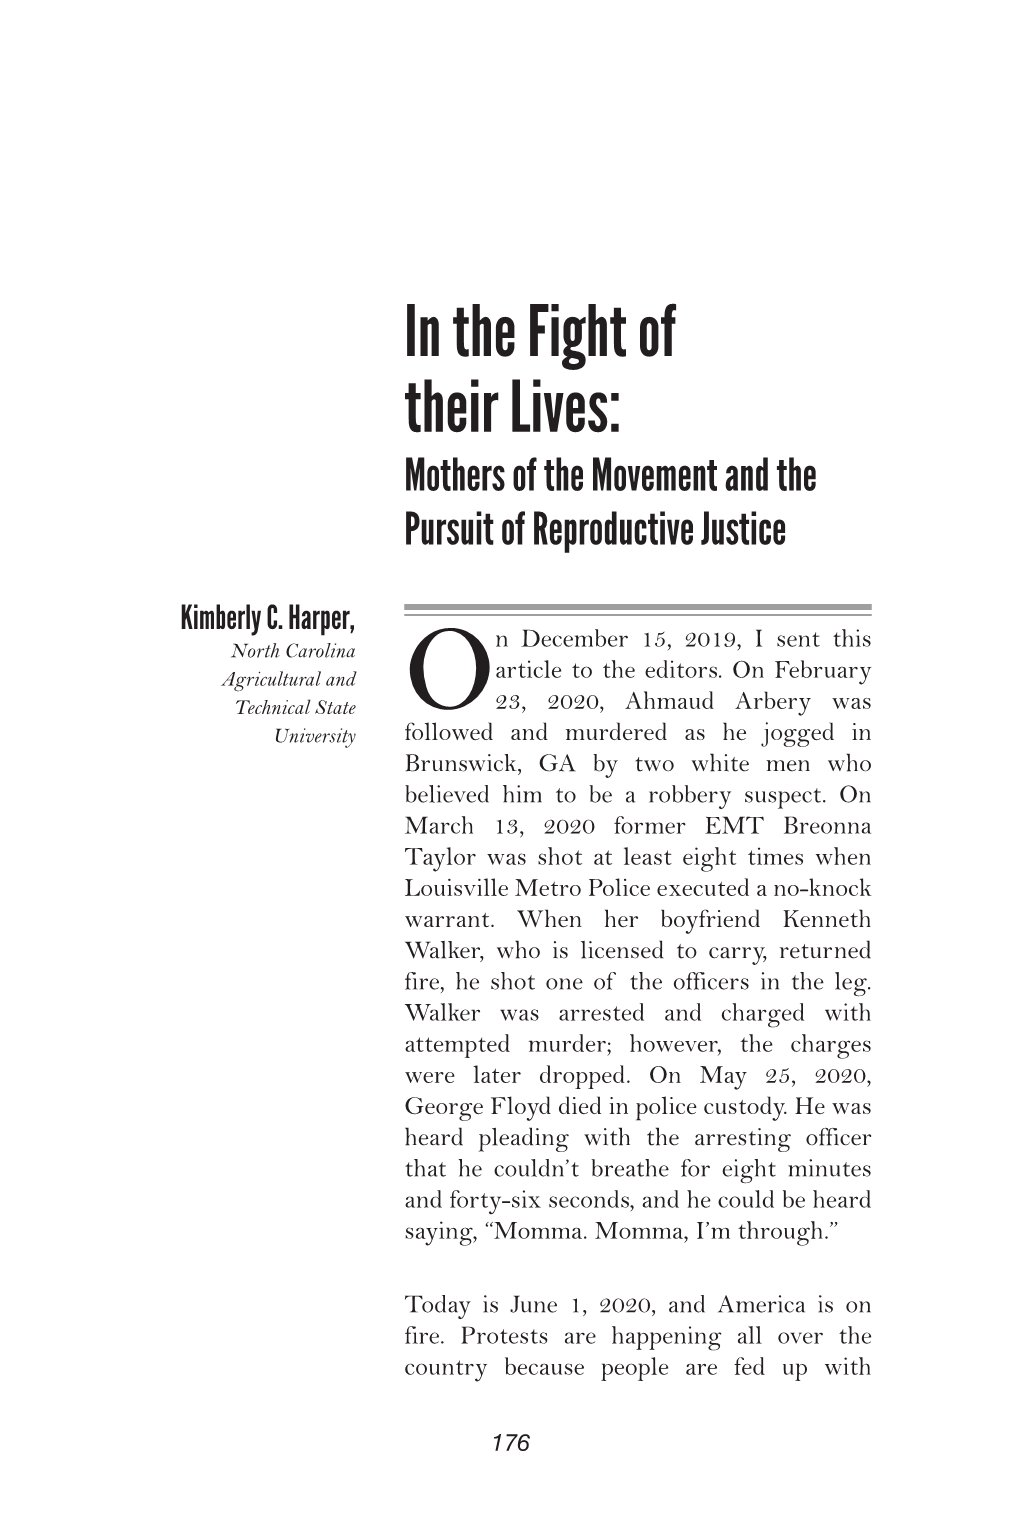 In the Fight of Their Lives: Mothers of the Movement and the Pursuit of Reproductive Justice